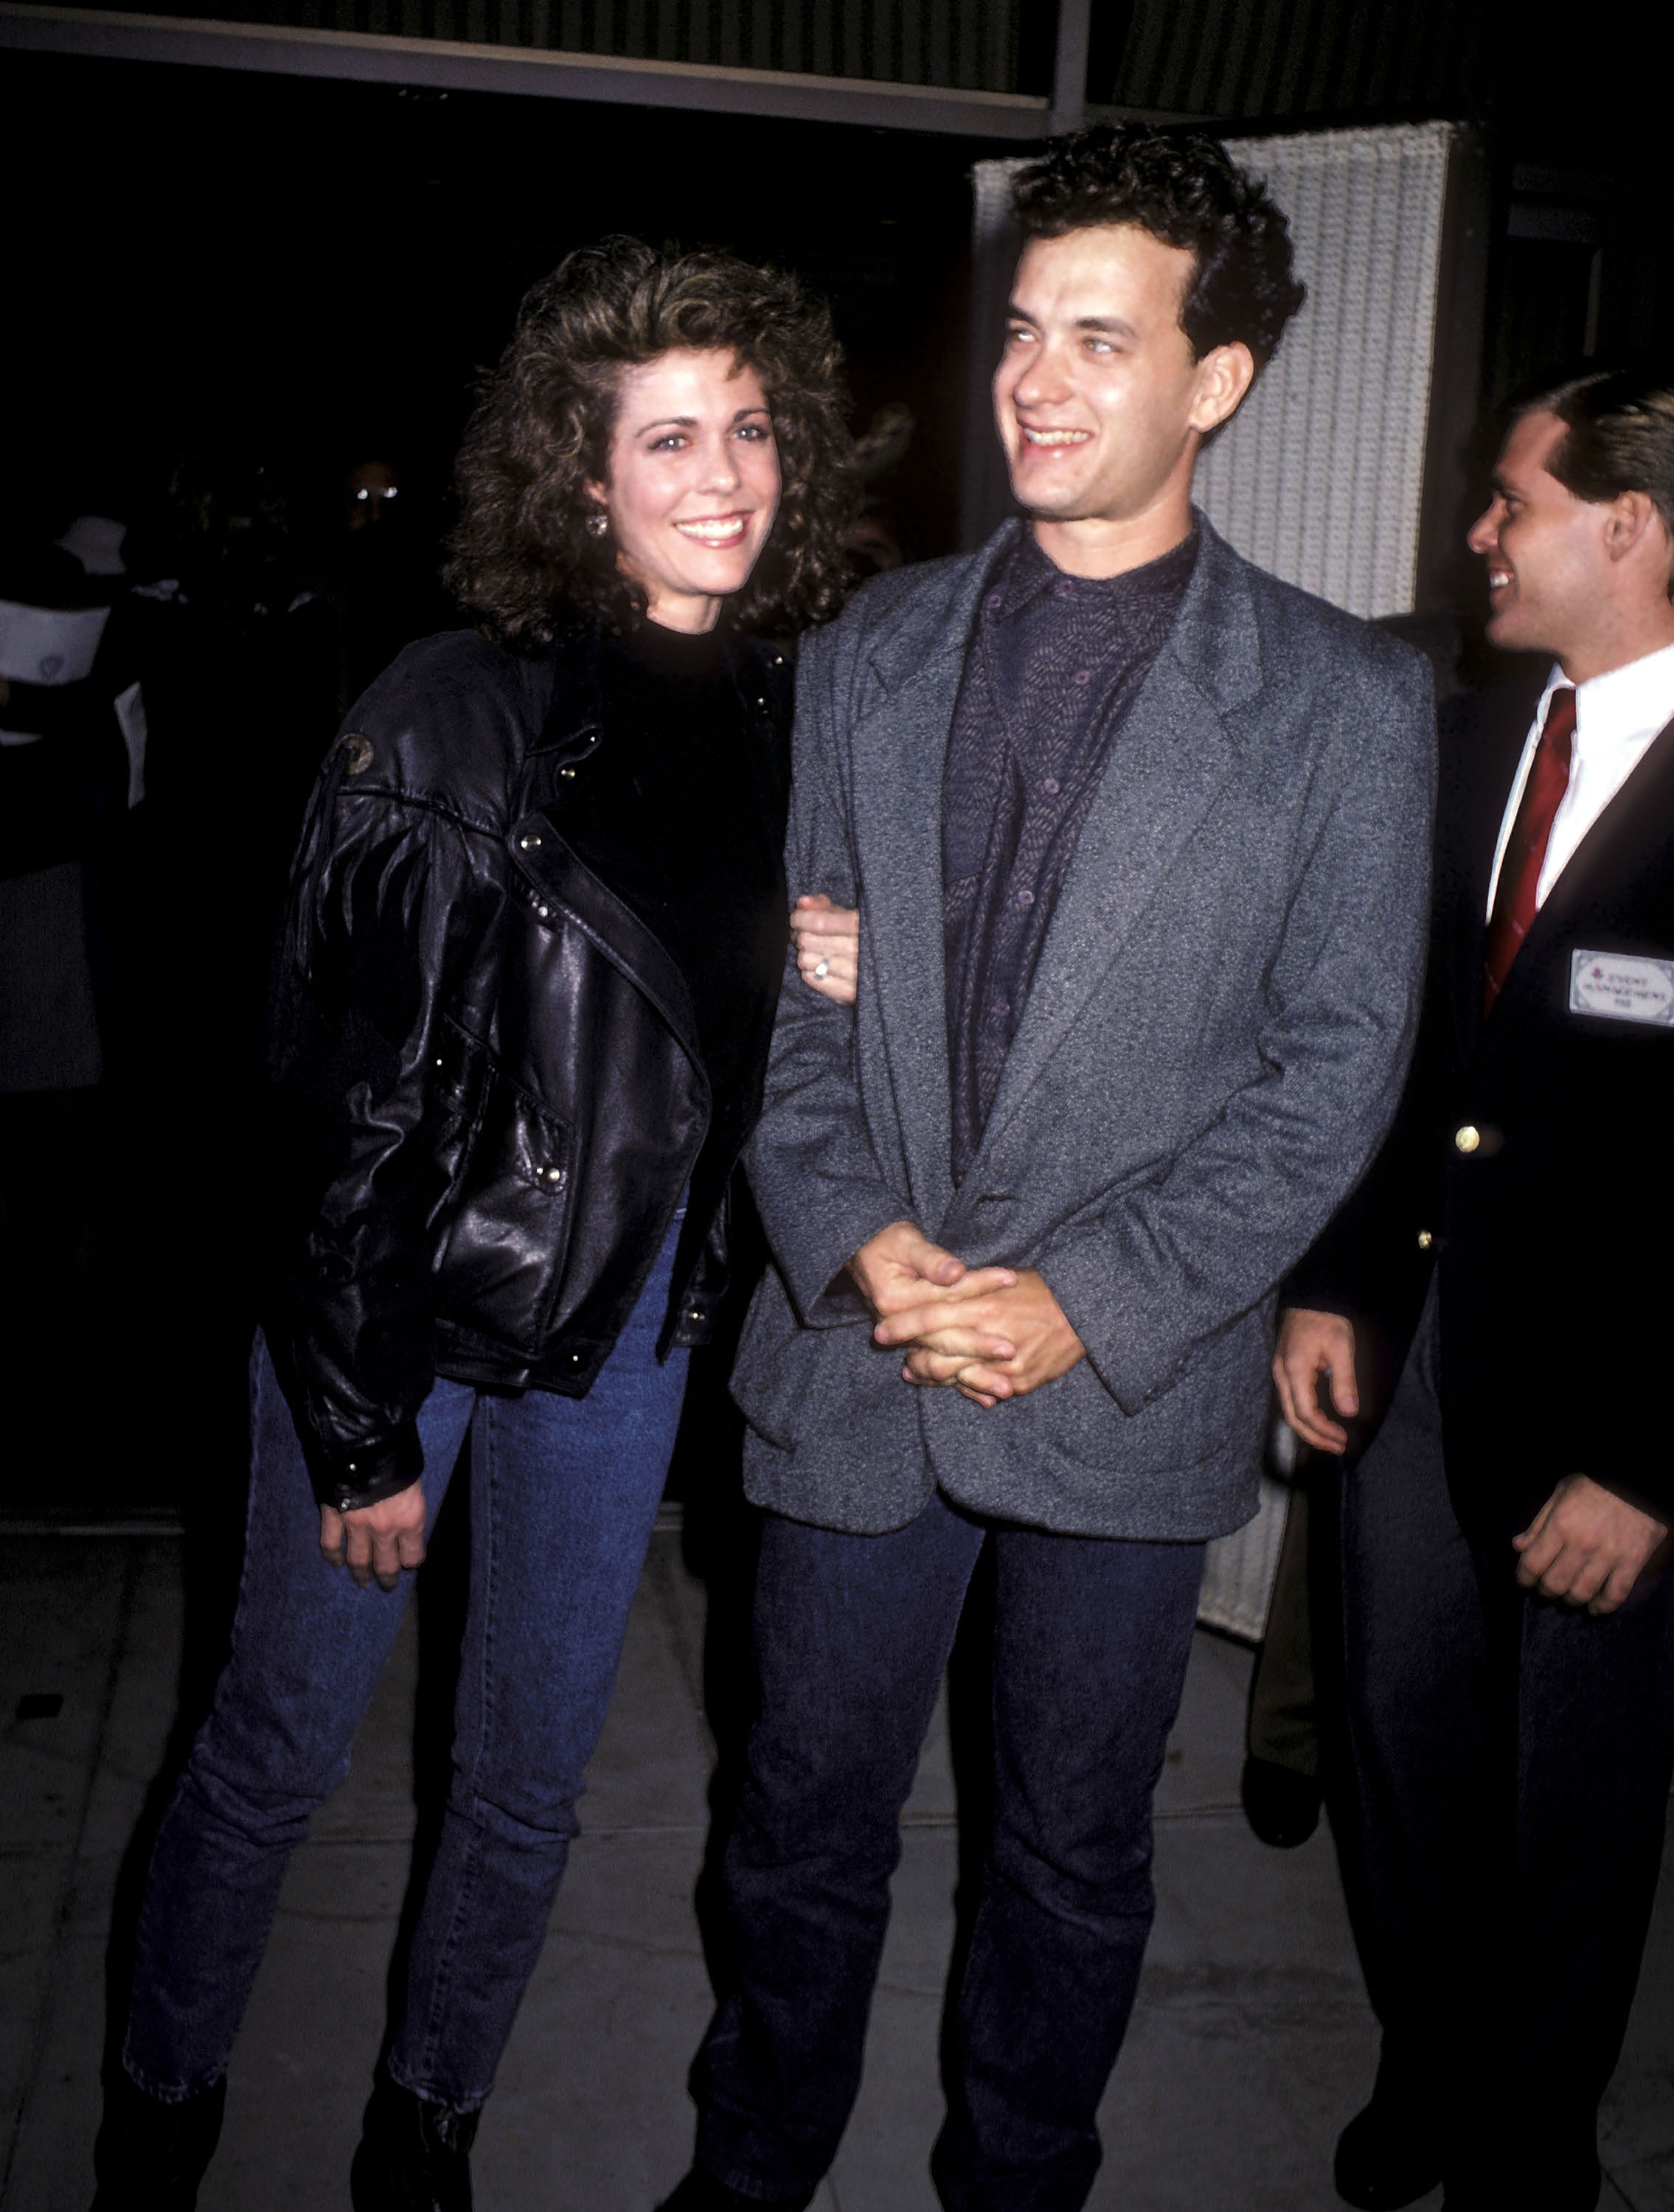 Rita Wilson and Tom Hanks at the "Three Amigos" Beverly Hills premiere on December 10, 1986, in Beverly Hills, California | Source: Getty Images